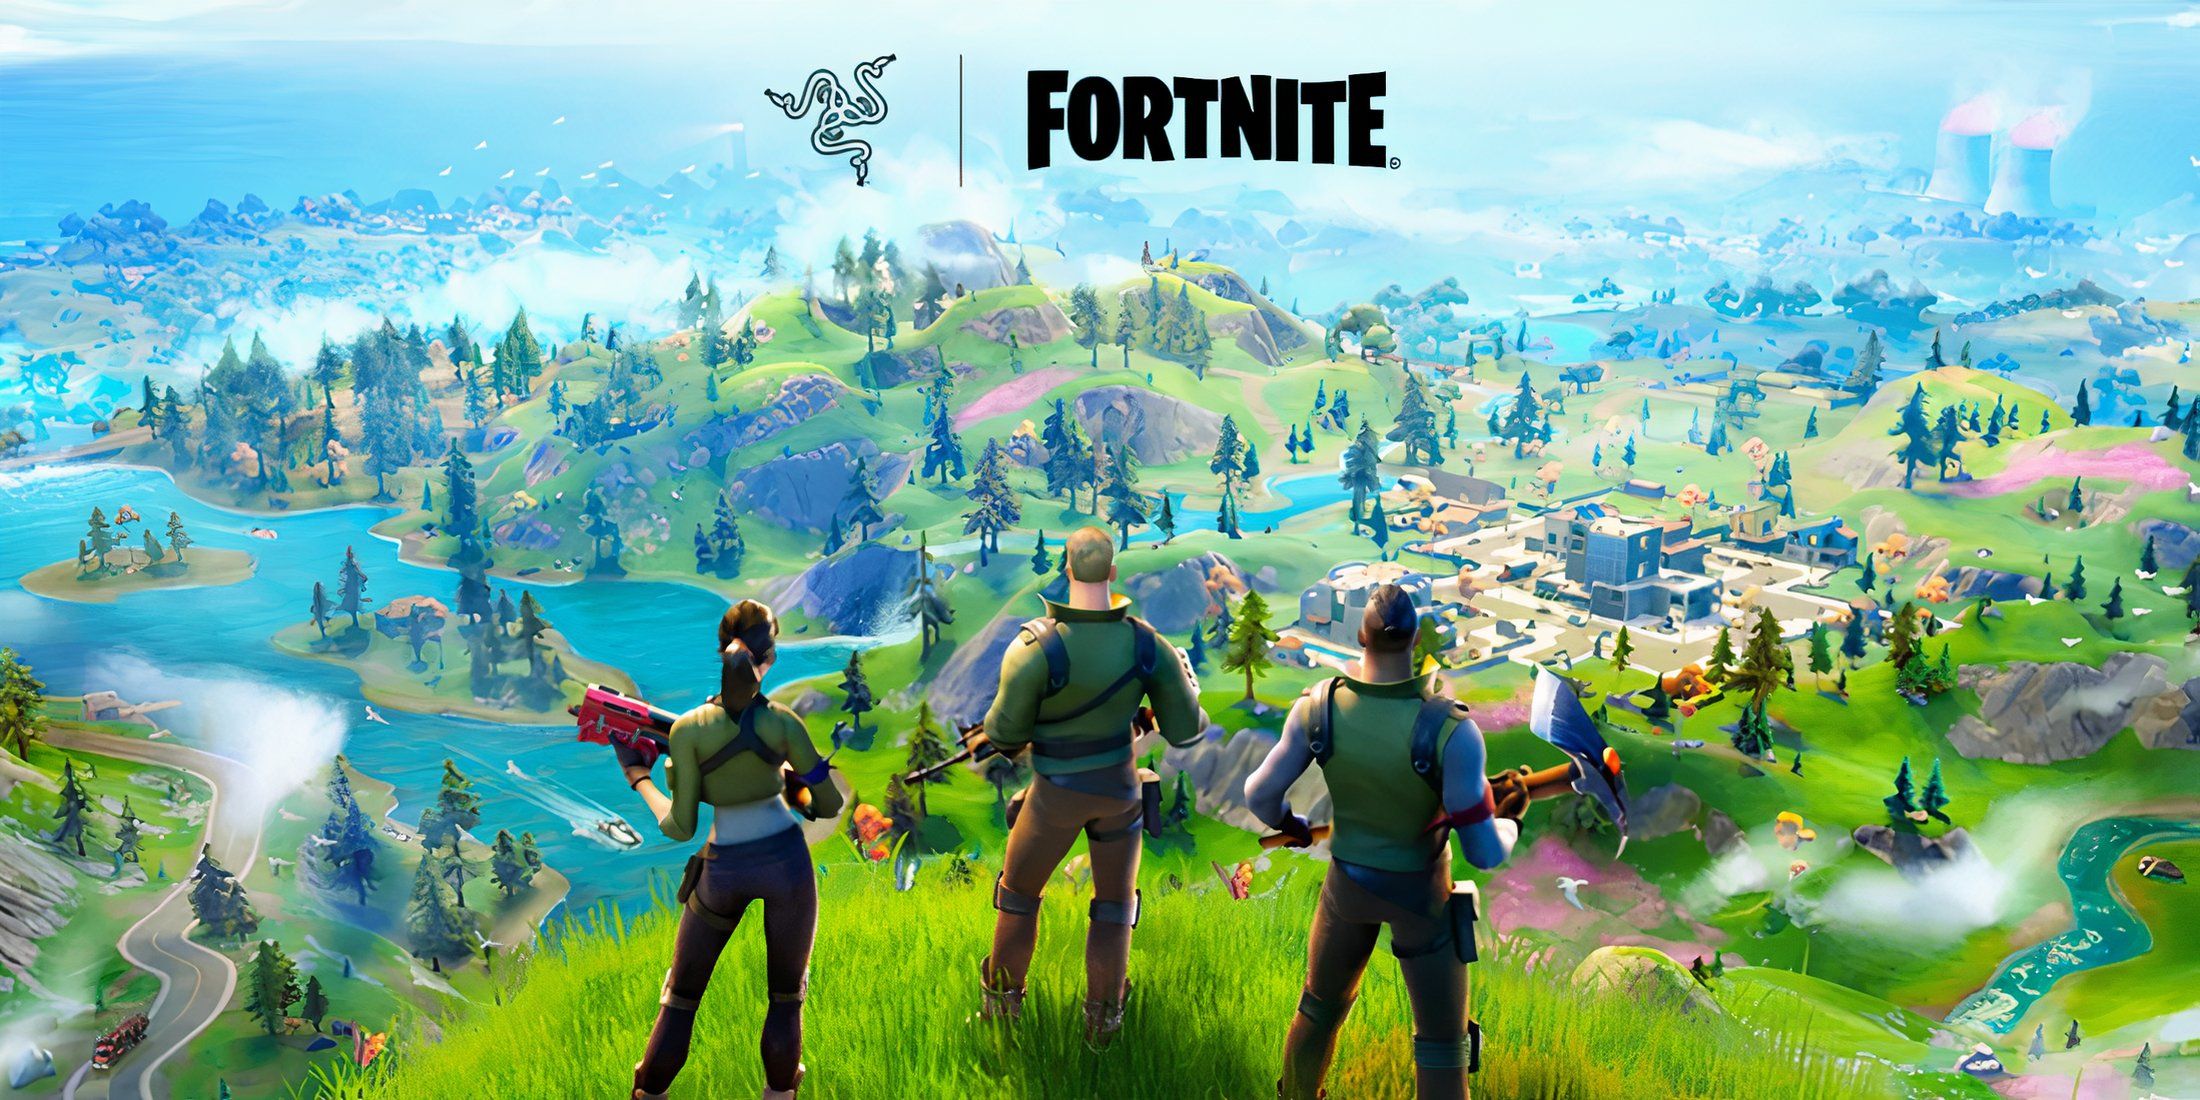 promotional image featuring razer and fortnite logo